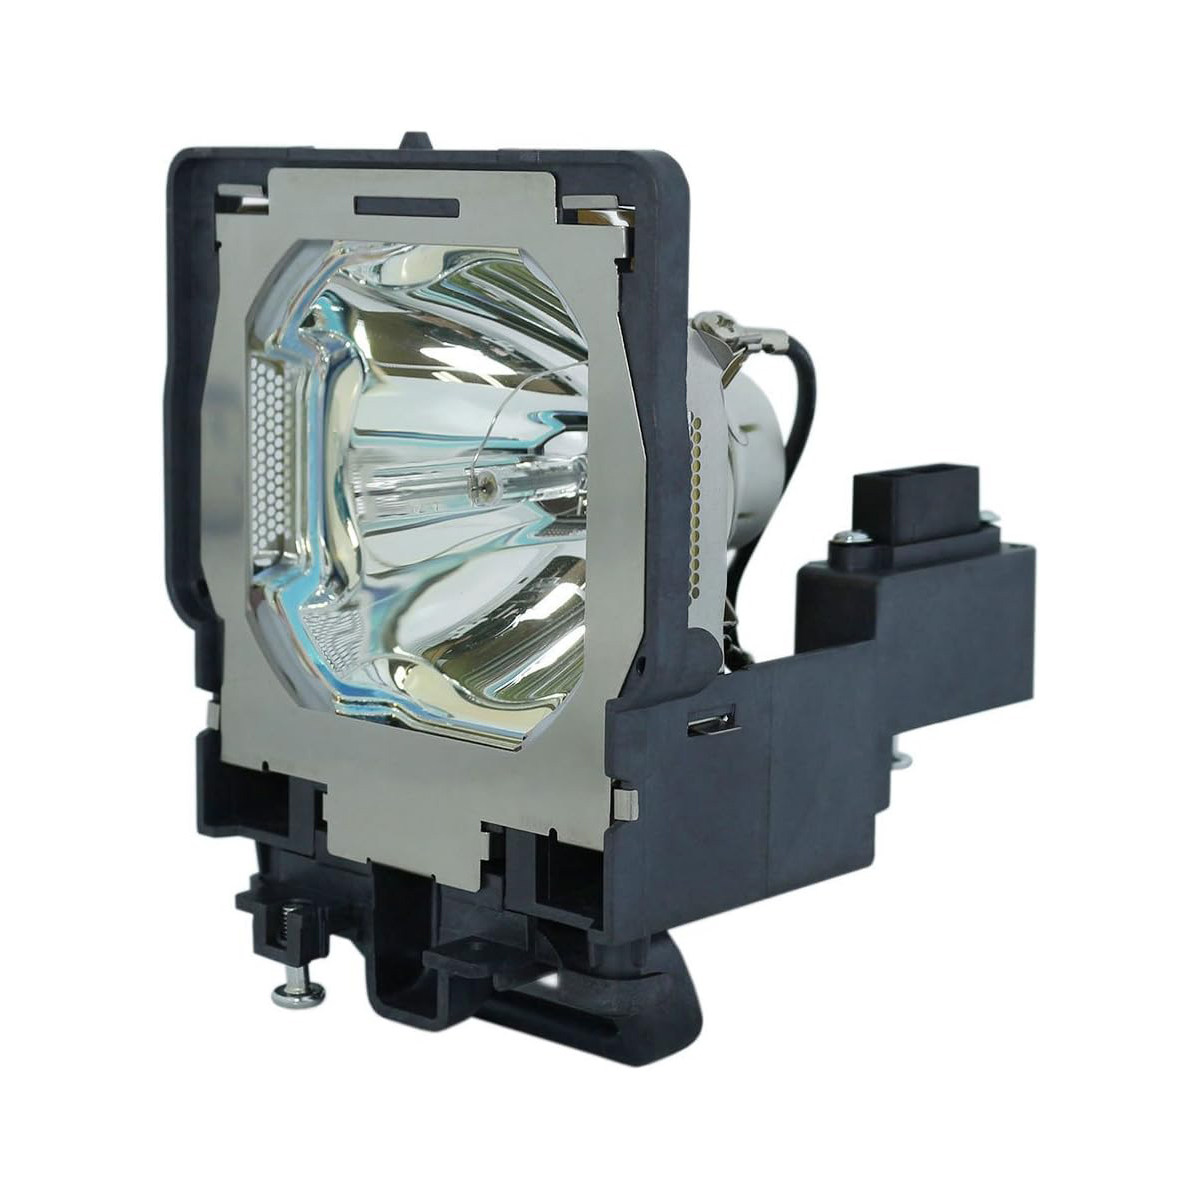 Replacement Projector lamp POA-LMP109 For Sanyo SANYO PLC-XF47